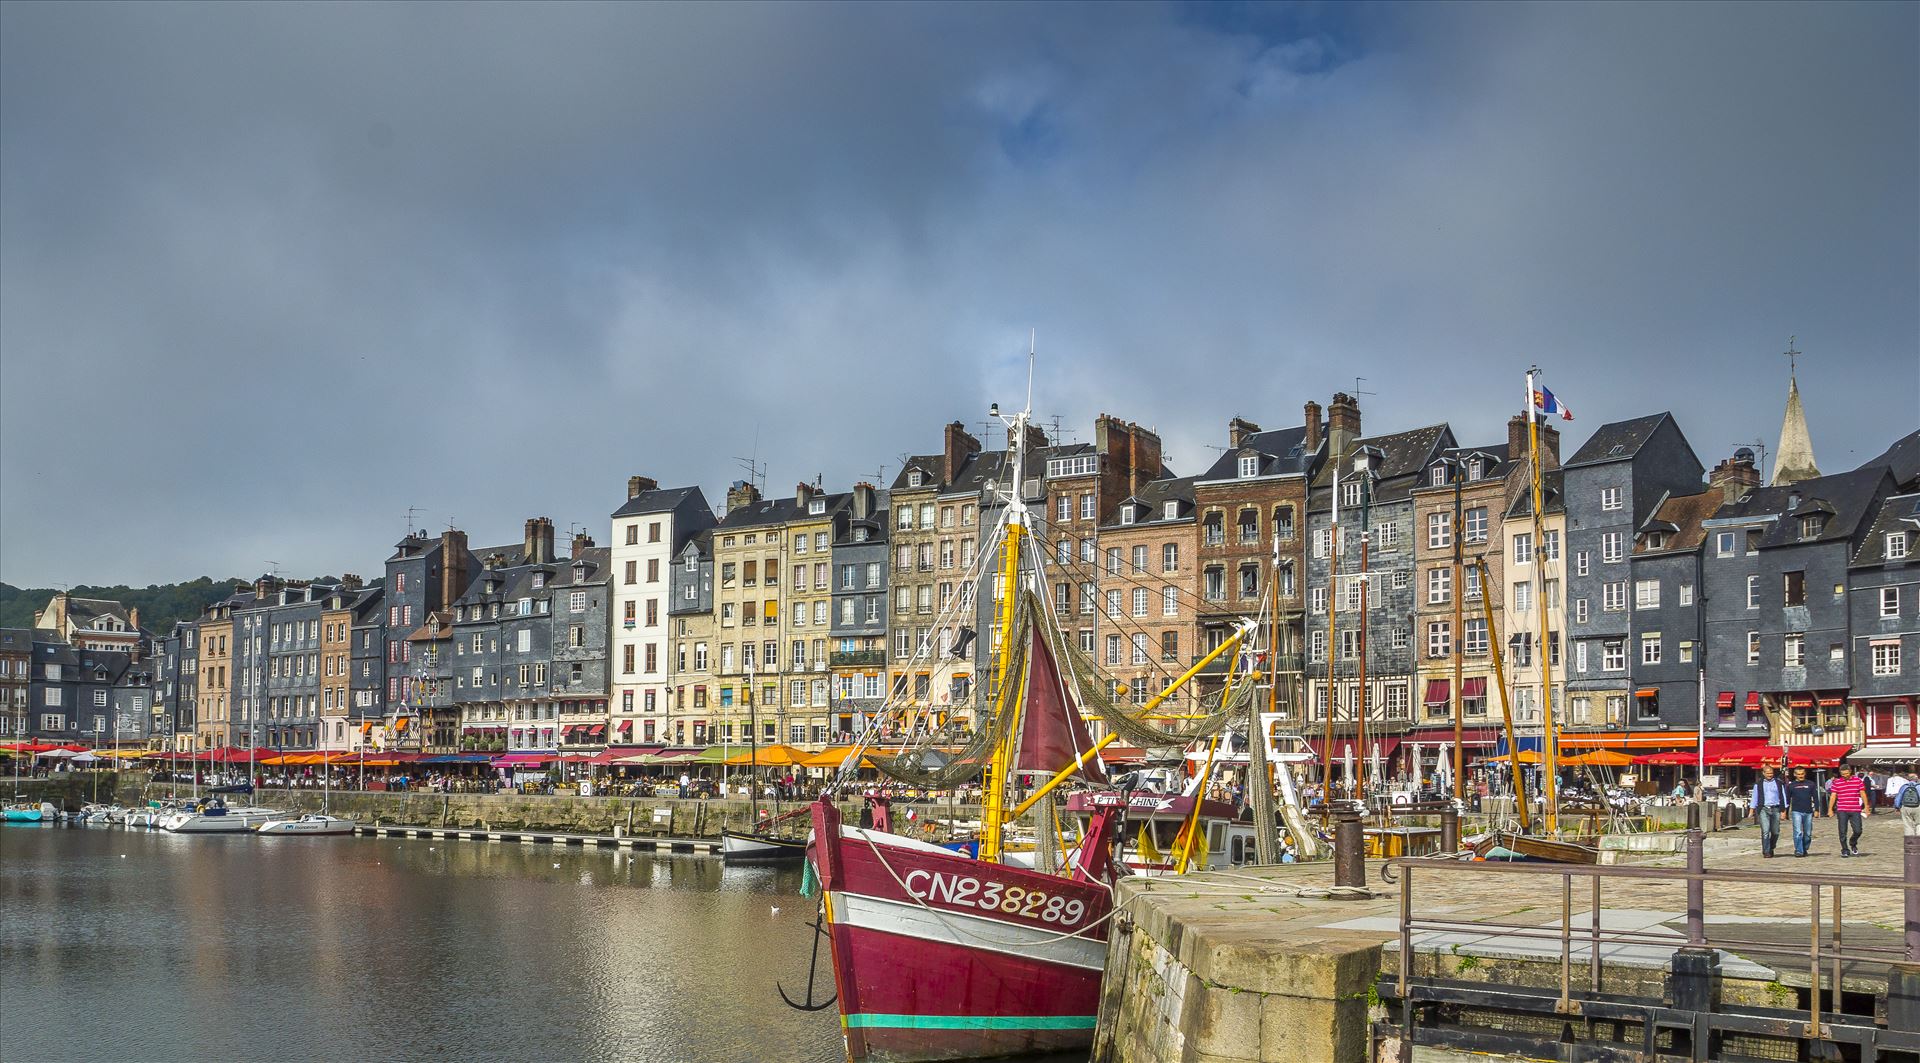 Honfleur, France Ports don’t come any prettier than Honfleur on the Seine’s estuary by Buckmaster